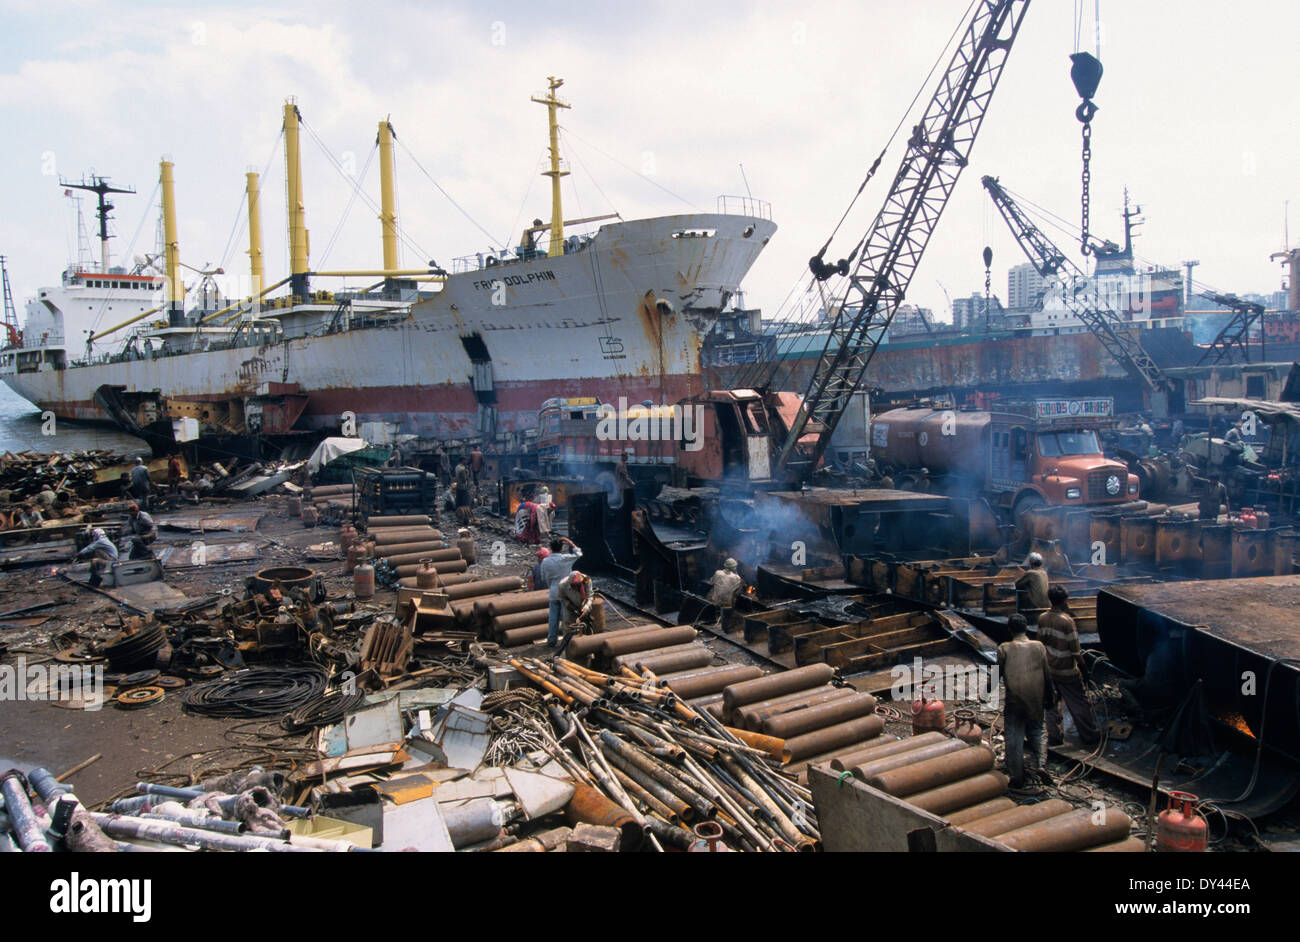 INDIA Mumbai, ship breaking yard in harbor area, cargo ships will be dismantled and the scrap is sold to the steel industry Stock Photo